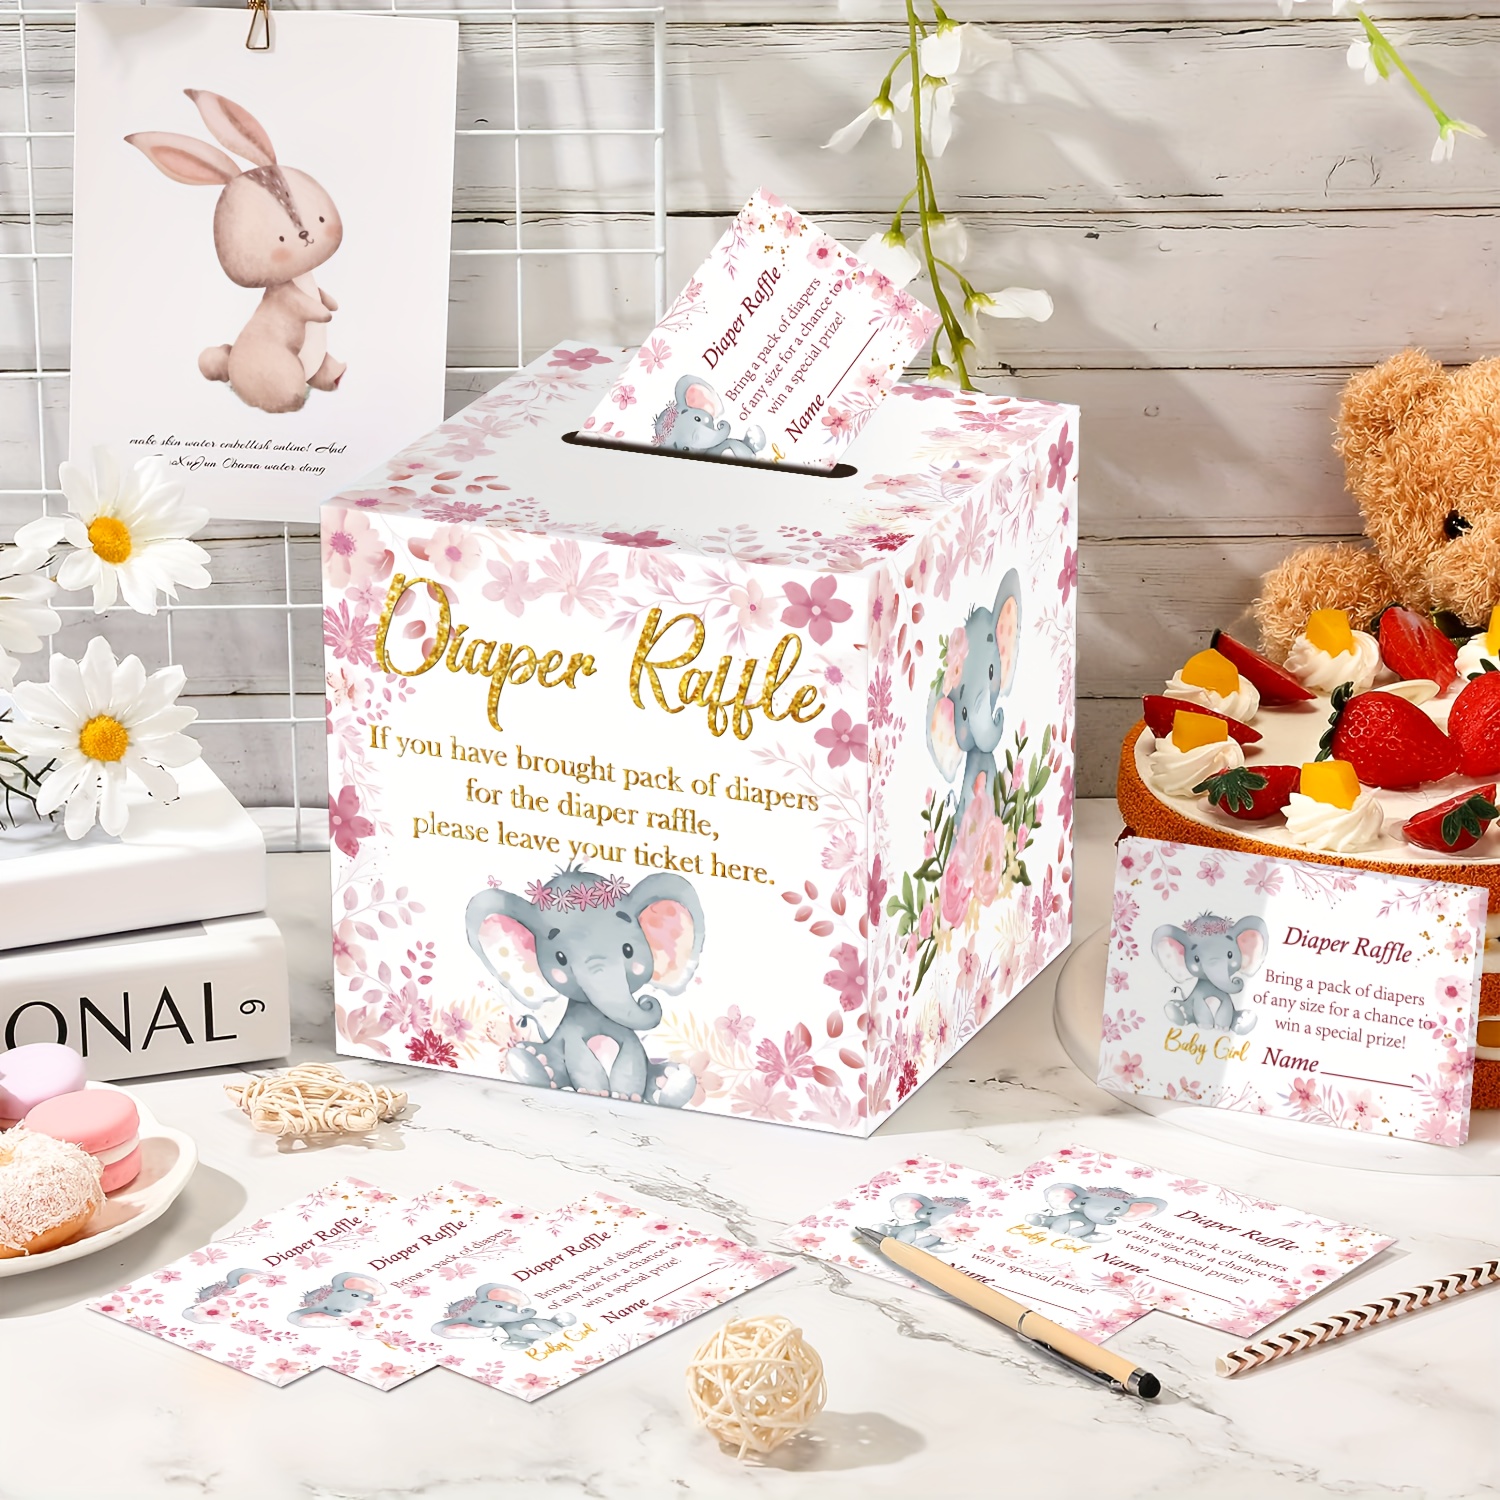 

51-piece Diaper Raffle & Advice Kit - Elegant Box With Adorable Tickets, Decor For Celebrations, Birthdays, Gender Reveals - Memorable Party Favors